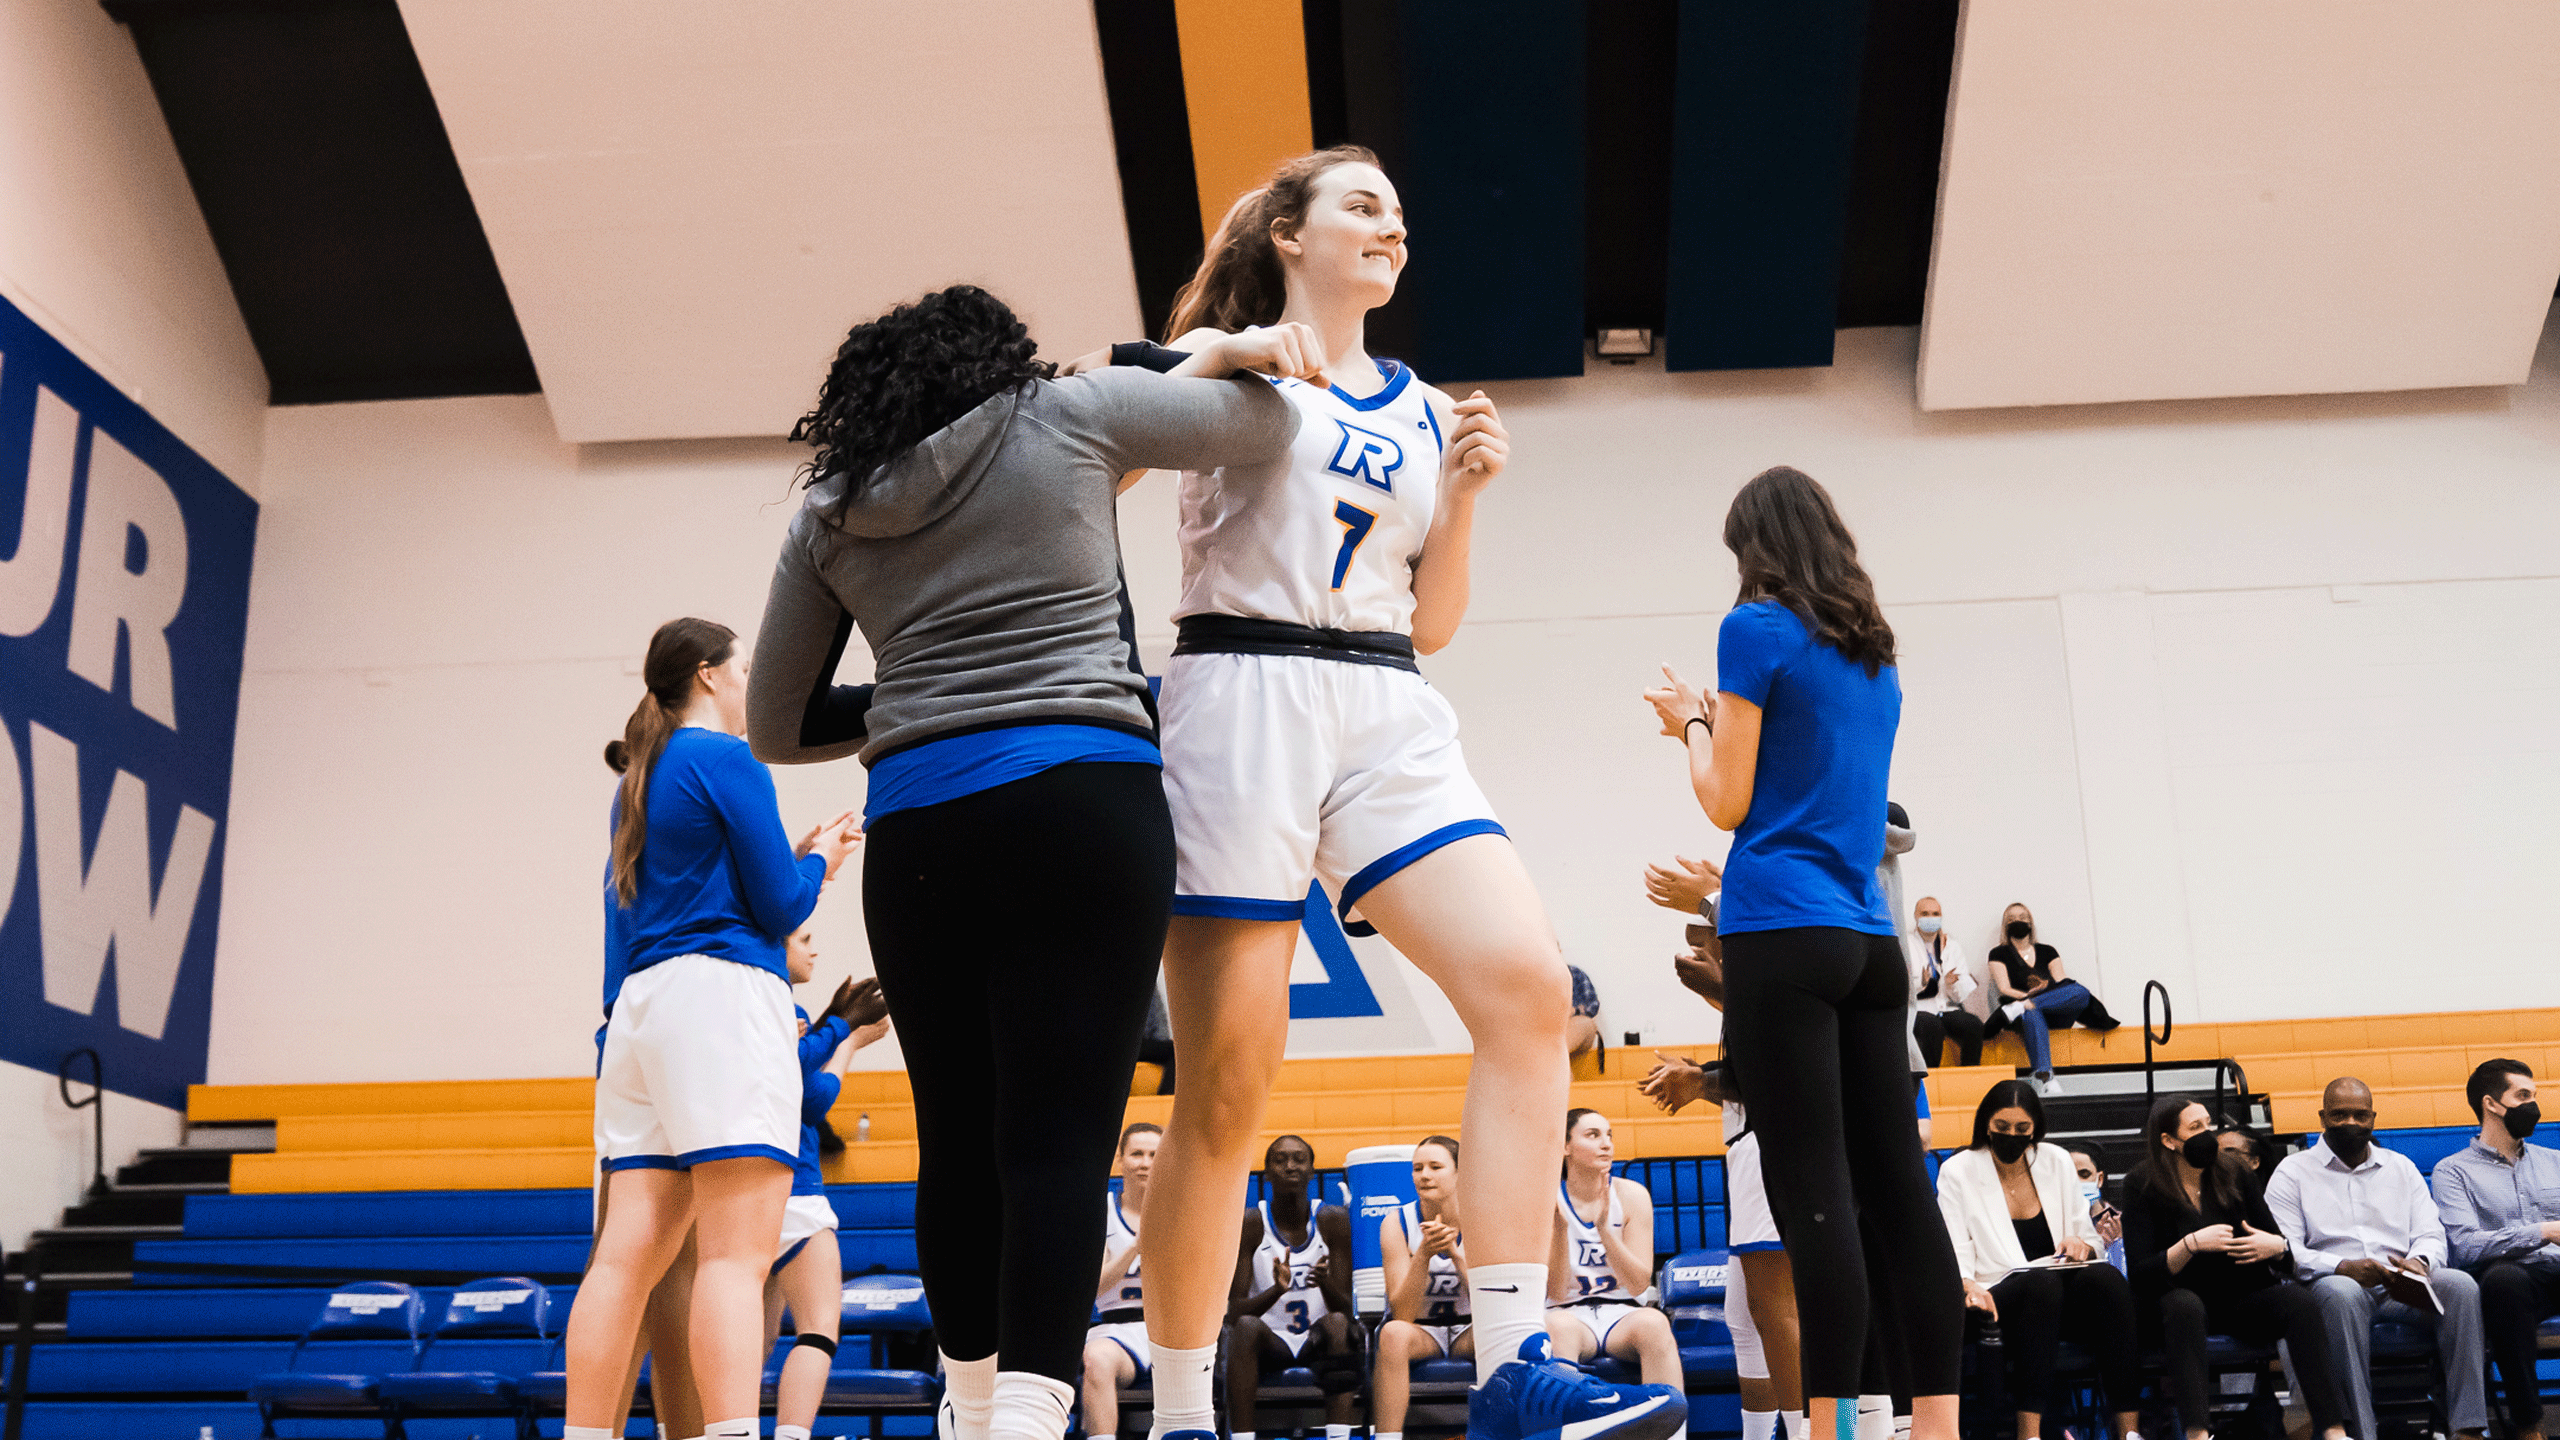 A Rams women's basketball player in a white jersey celebrates